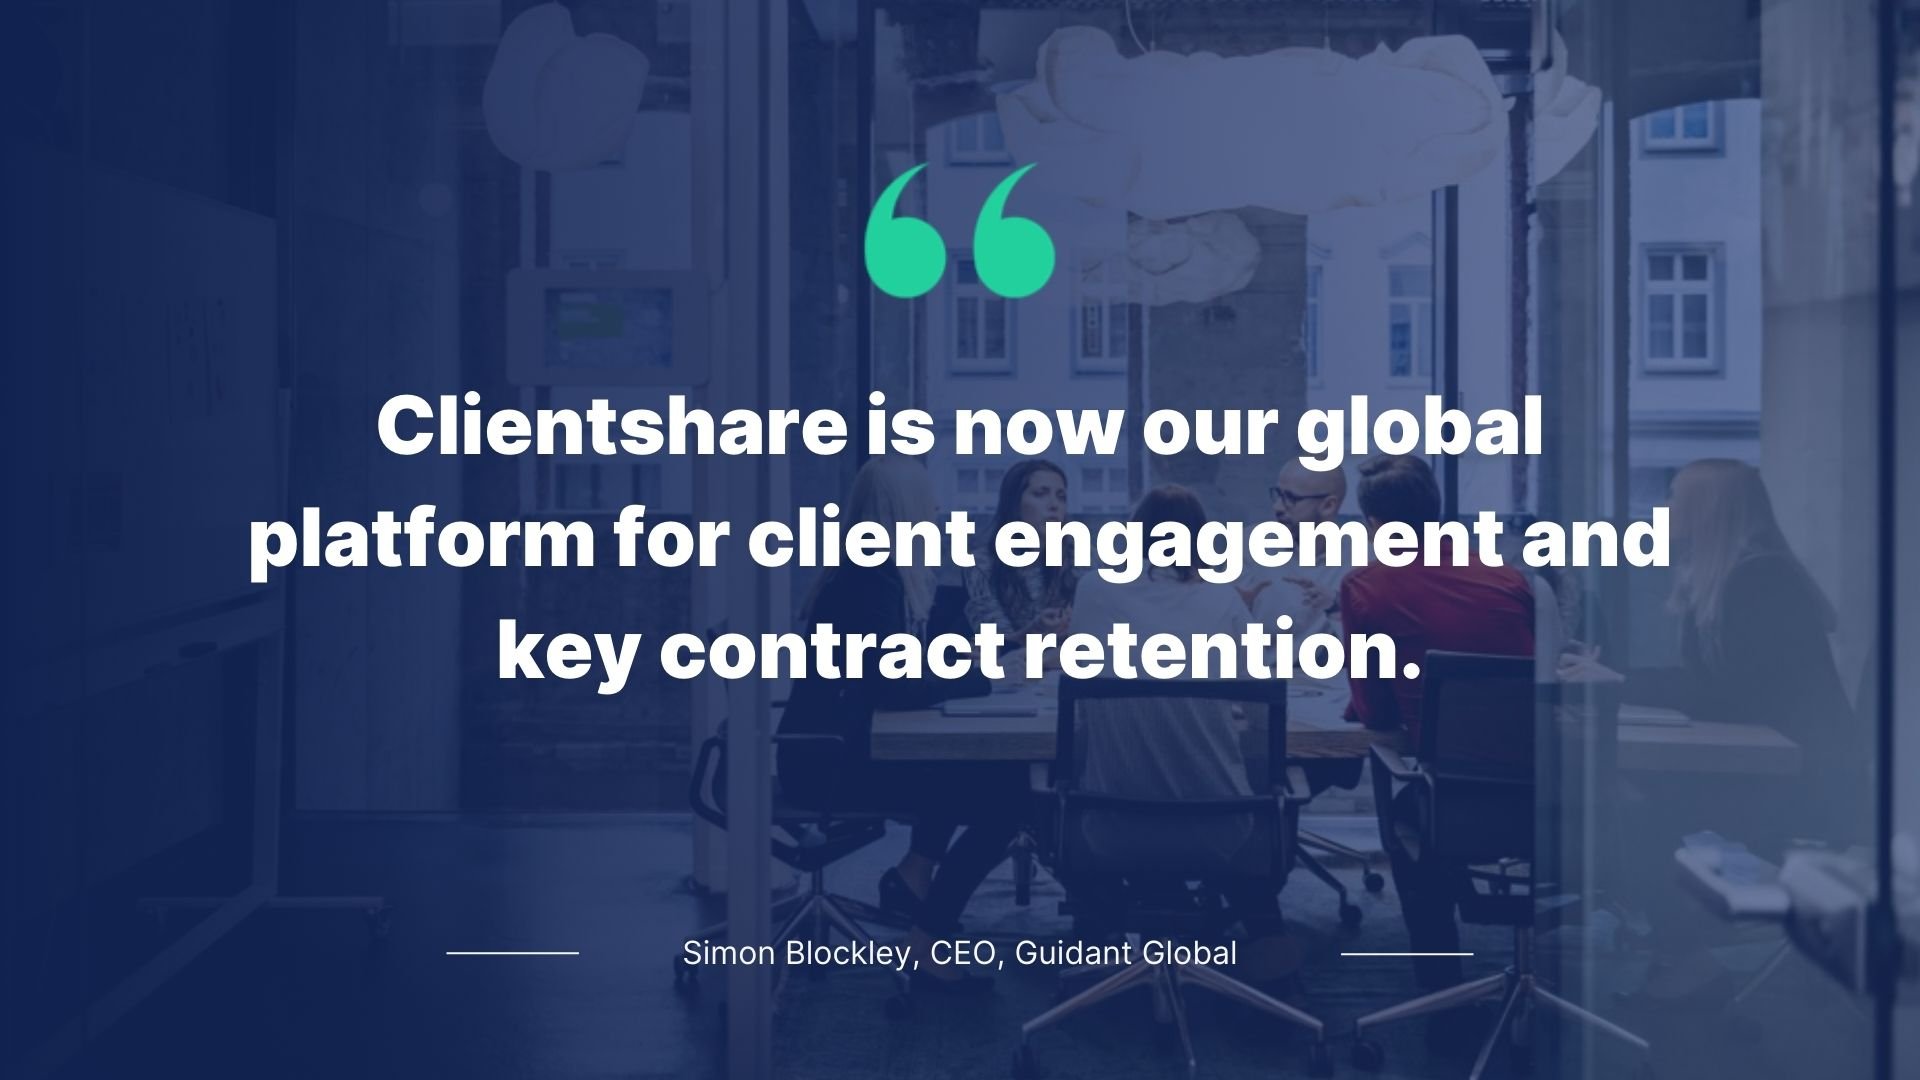 Quote by Simon Blockley, CEO, Guidant Global: Clientshare is now our global platform for client engagement and key contract retention.